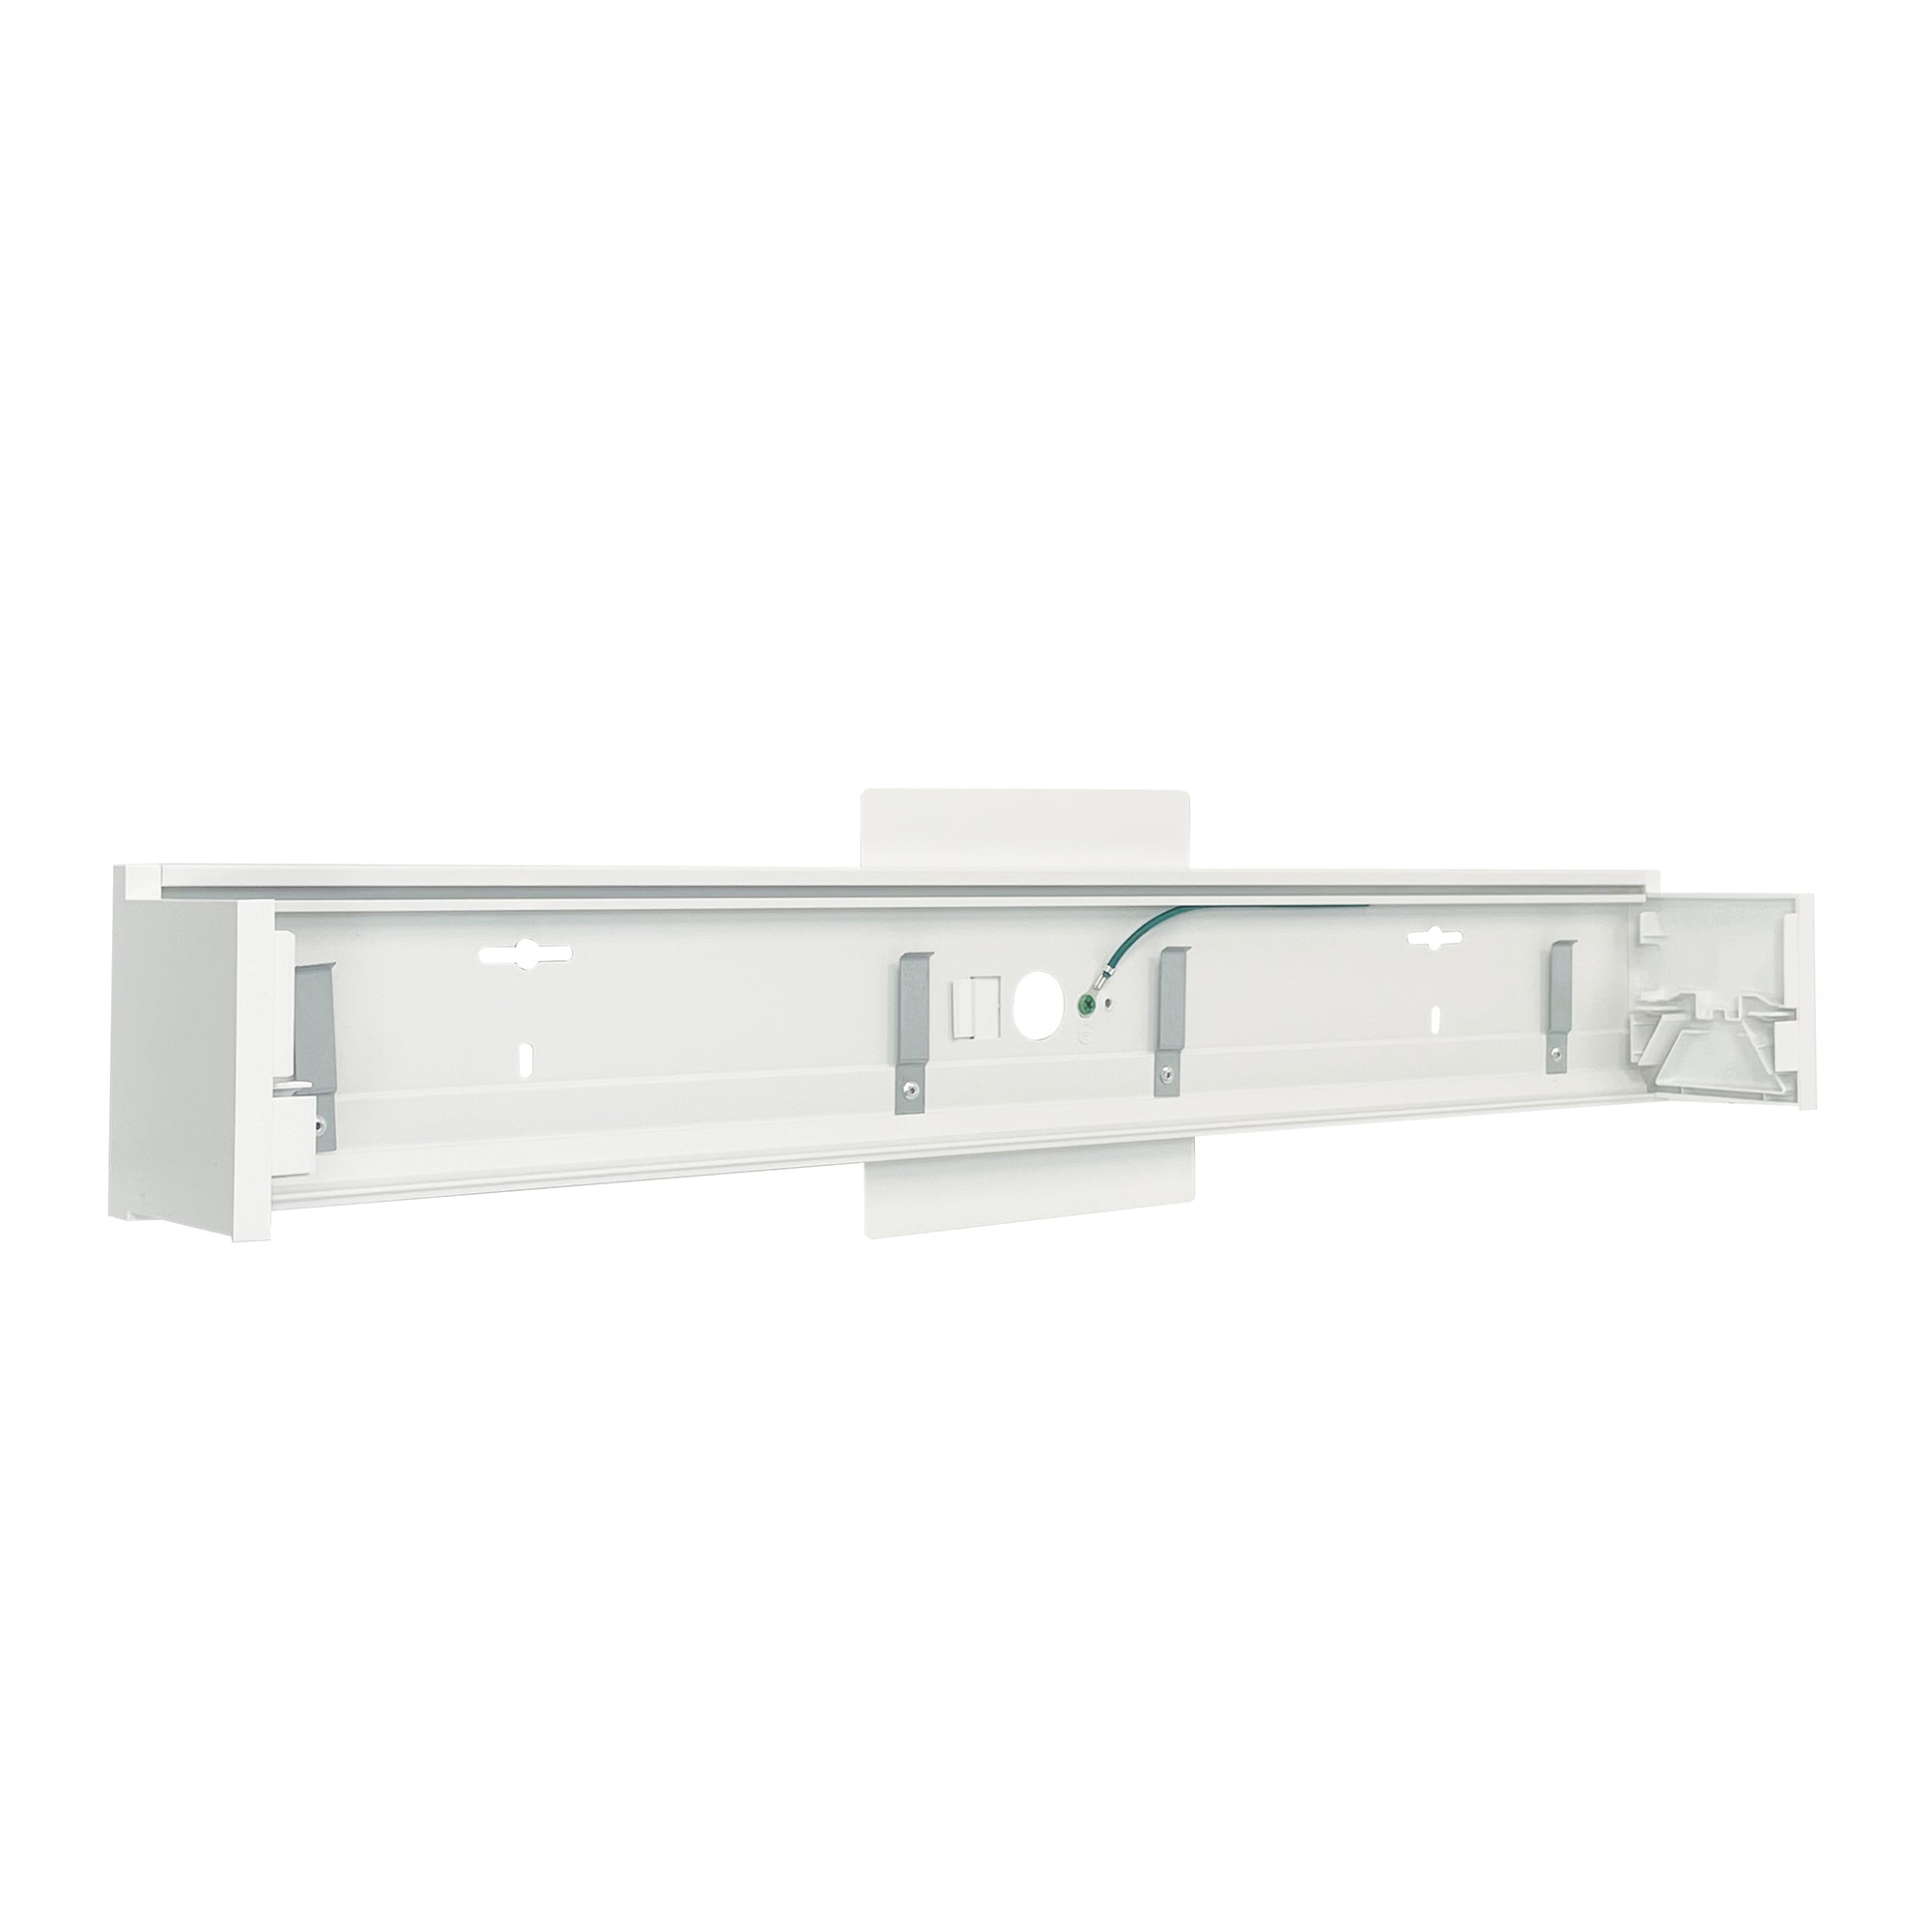 Nora Lighting NLUD-4WMW - Linear - 4' Wall Mount Kit for NLUD-4334, White Finish